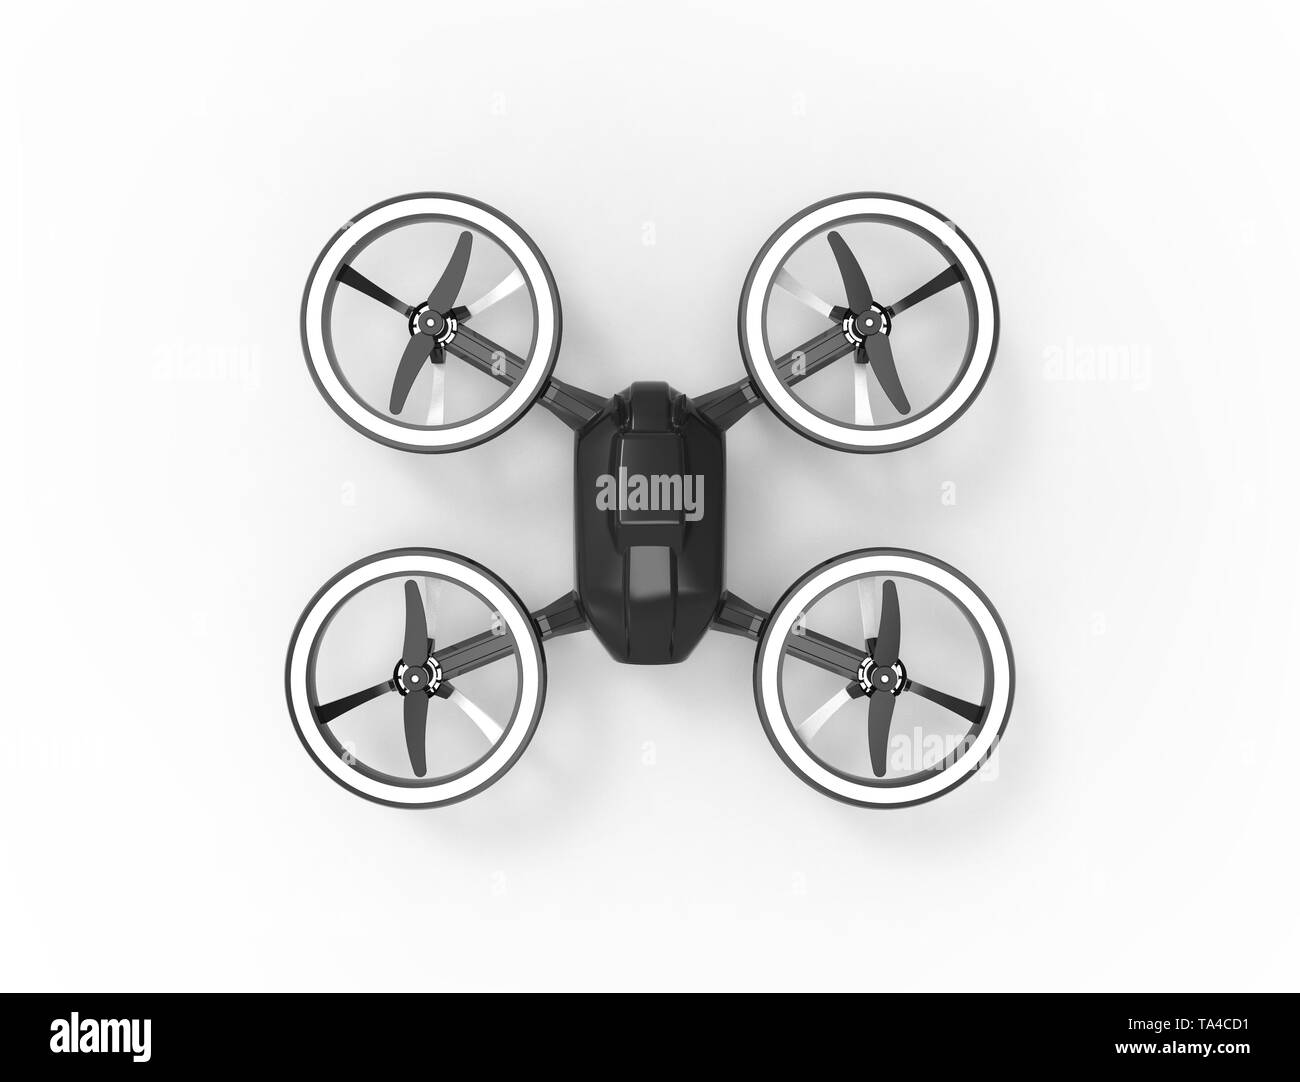 3D illustration of a black drone isolated in white background Stock Photo